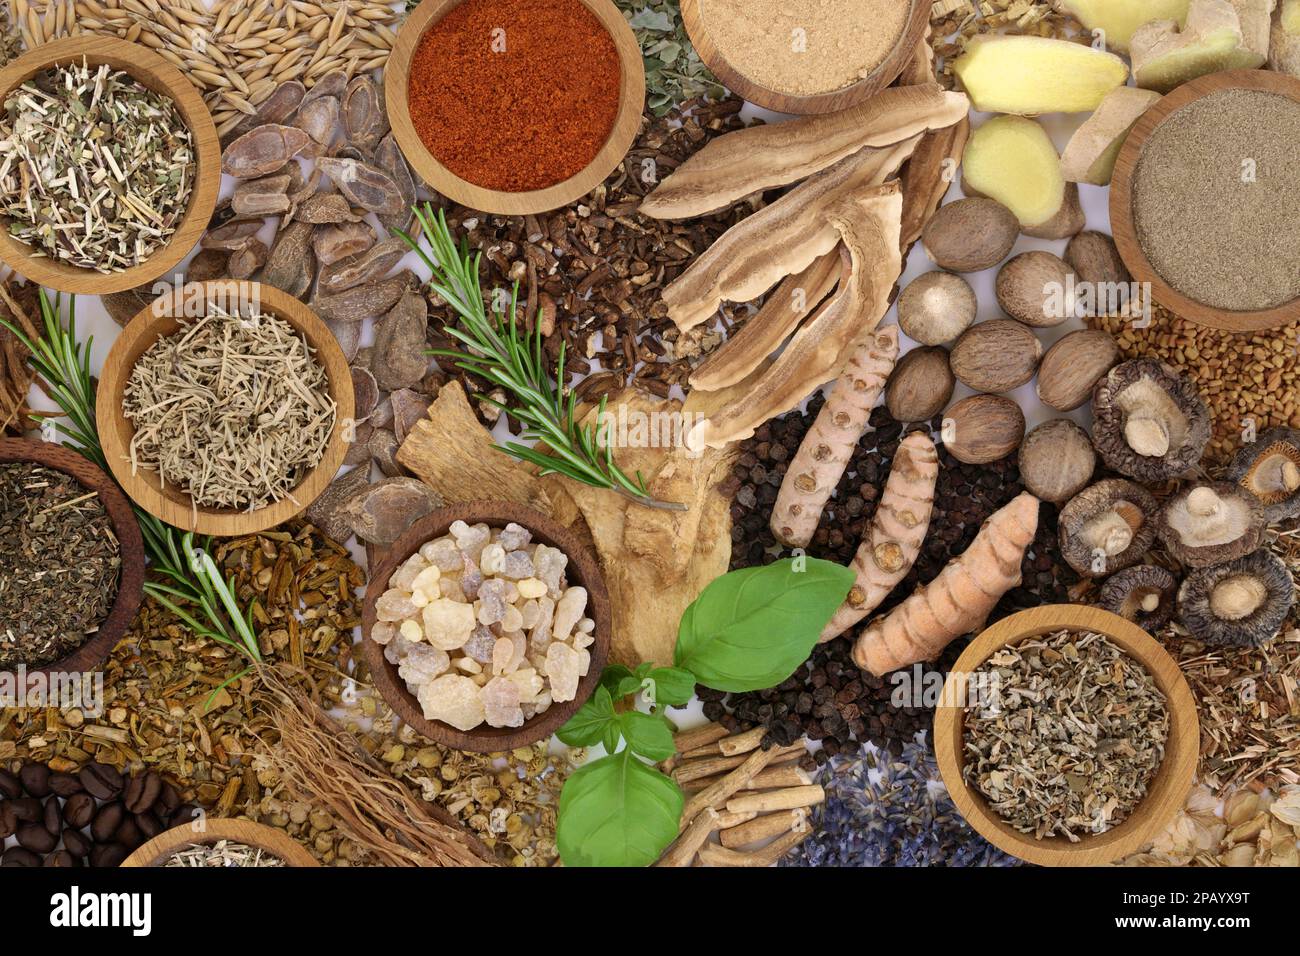 Nervine alternative medicine health food herbal plant medicine. Herbs and foods to soothe anxiety and stress or to stimulate the nervous system. Stock Photo